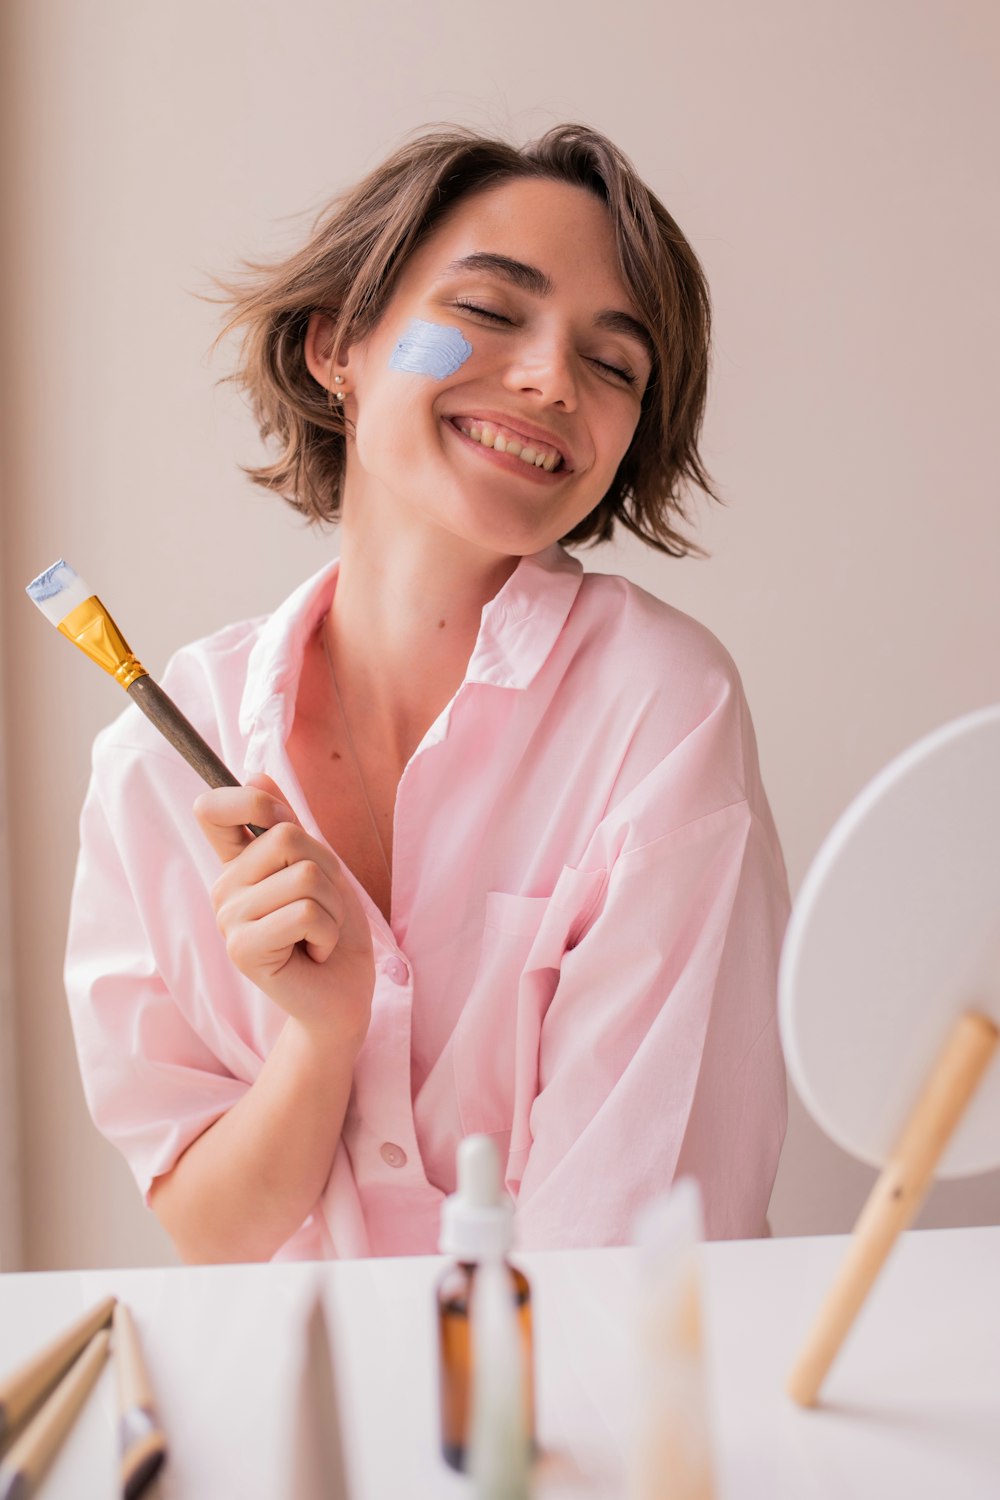 a woman smiling while holding a paintbrush